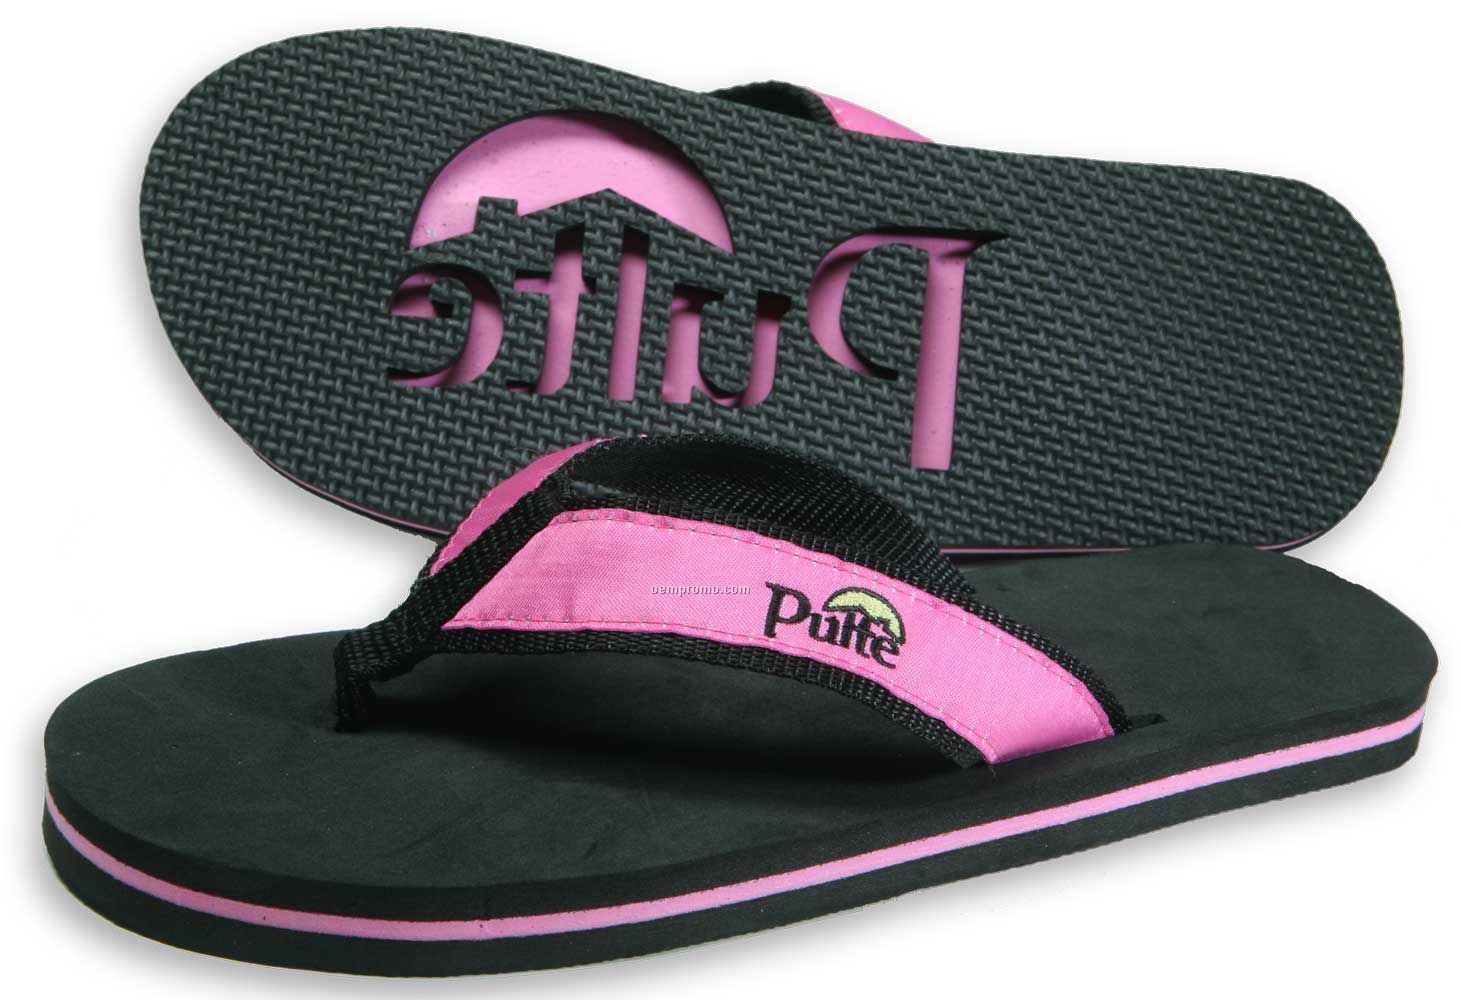 Collegiate Surf Style Flip Flop With All-fabric Straps